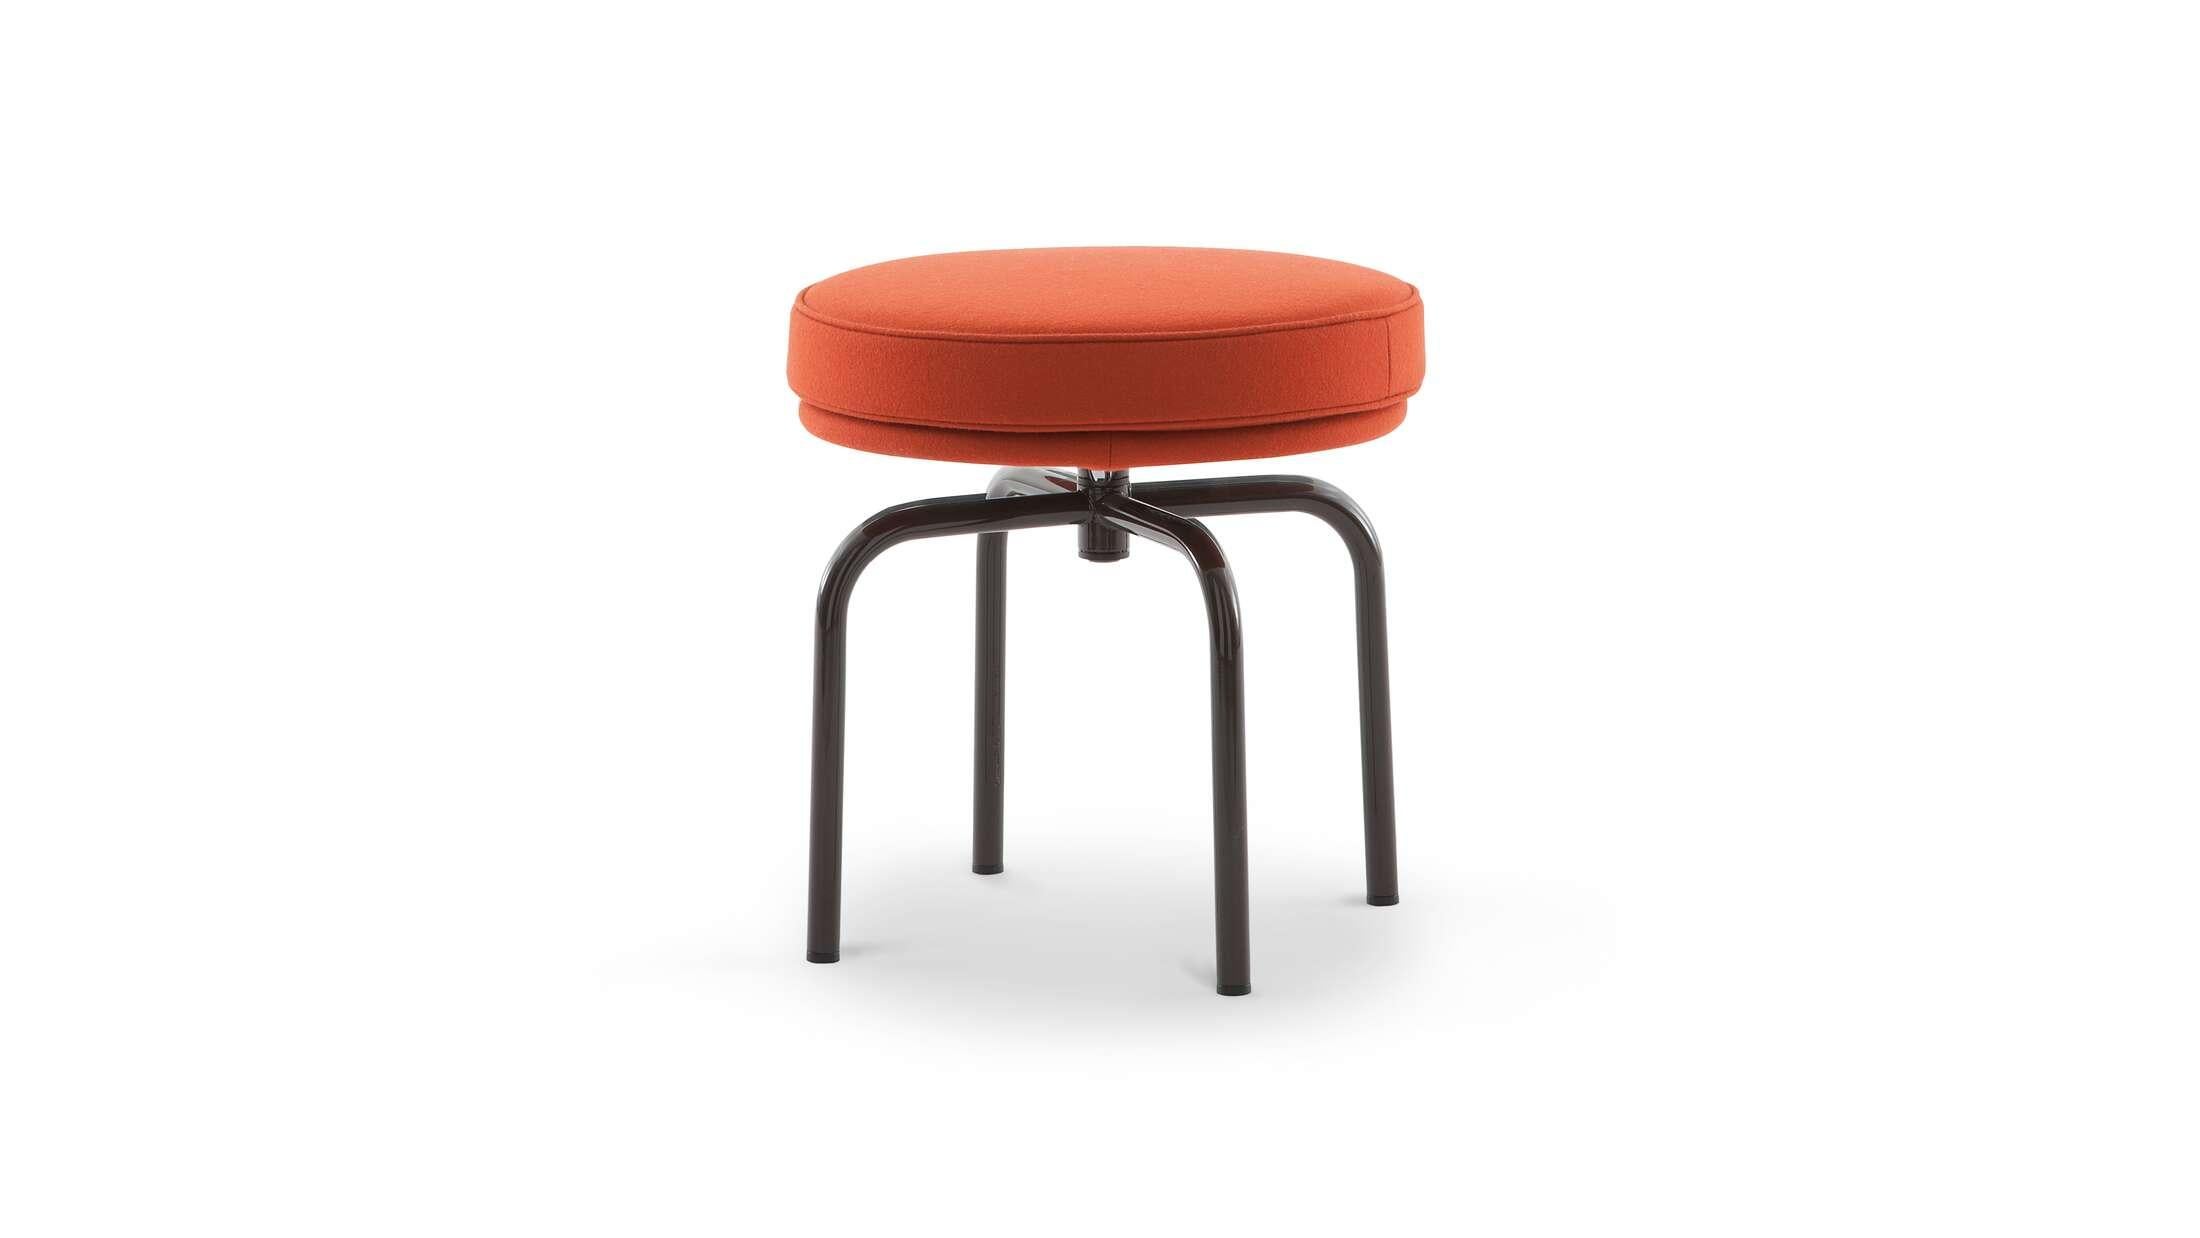 Charlotte Perriand LC8 stool by Cassina. Prices vary dependent on the chosen color and material. 
   